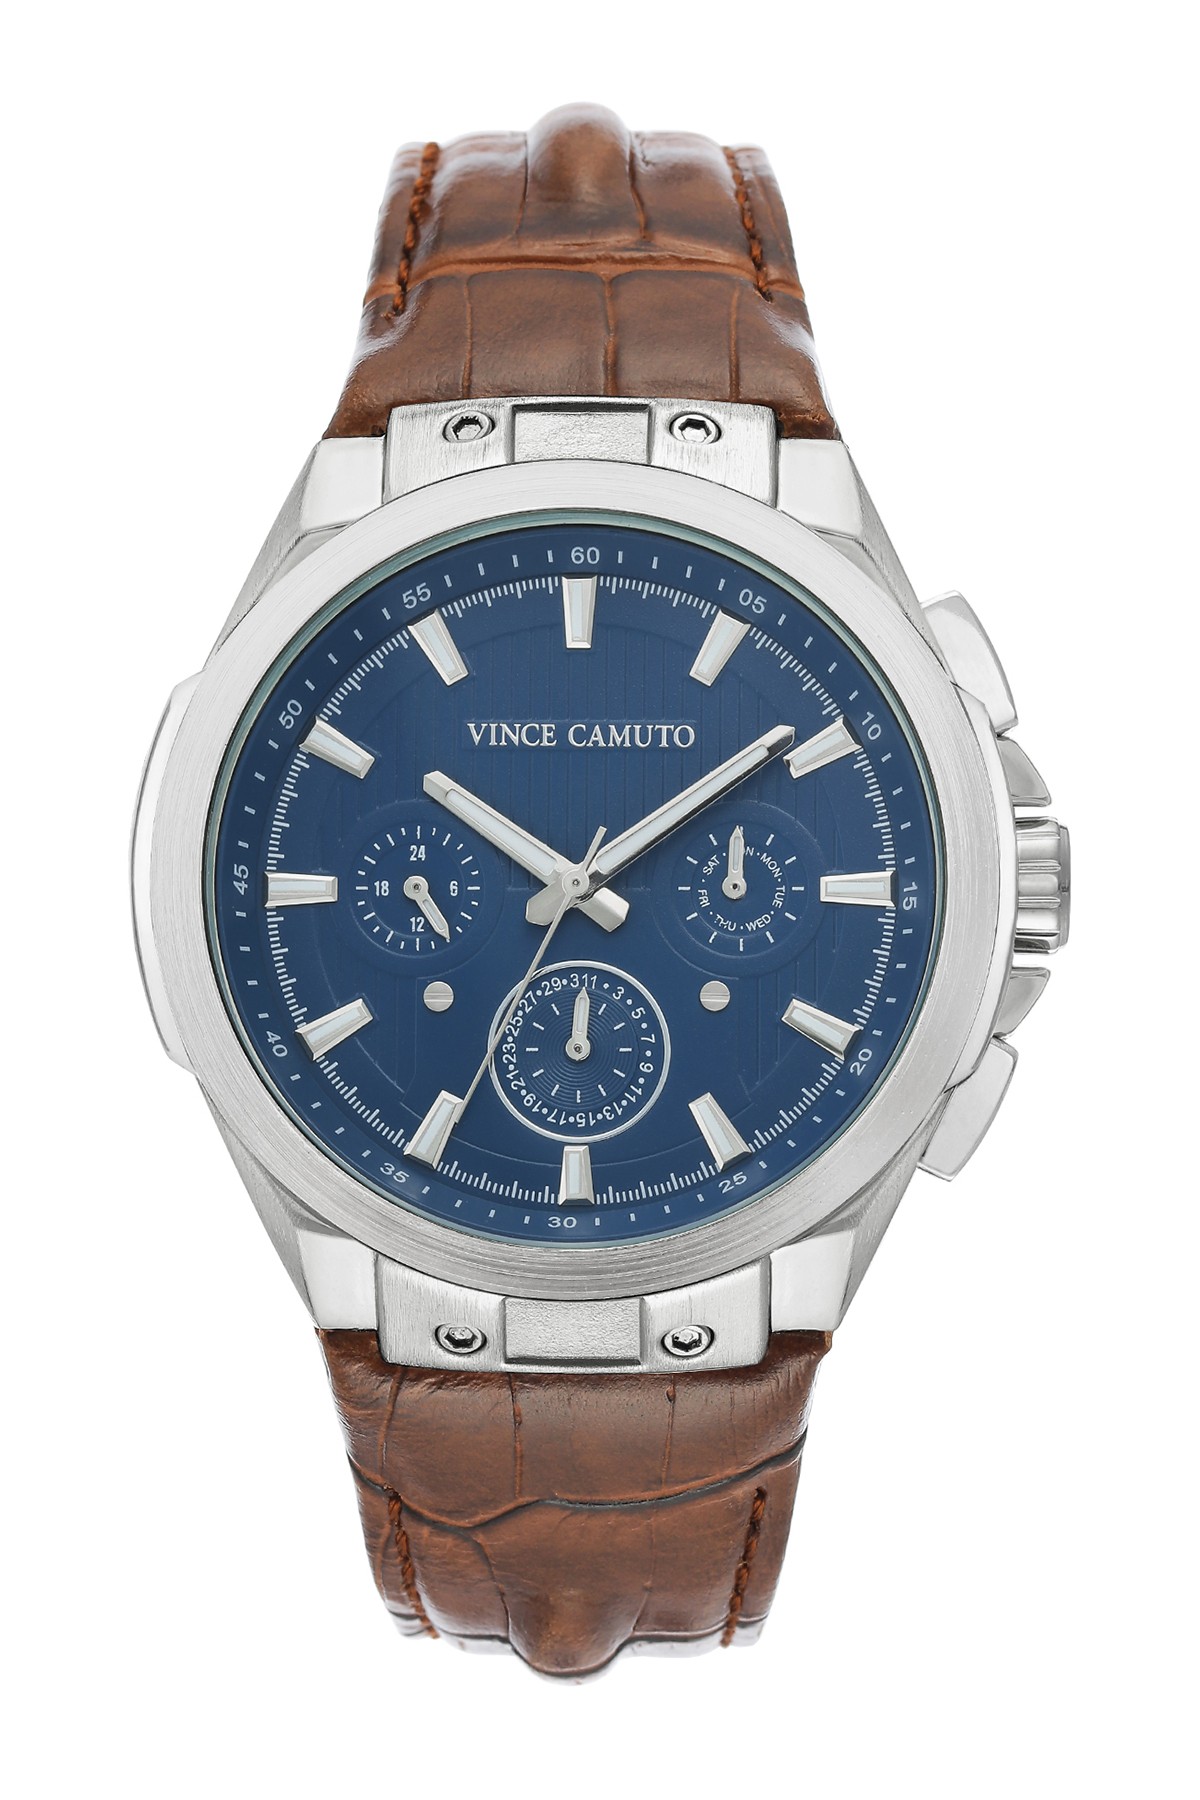 Vince Camuto Chronograph 45mm Blue Dial Brown Leather Men's Watch VC ...